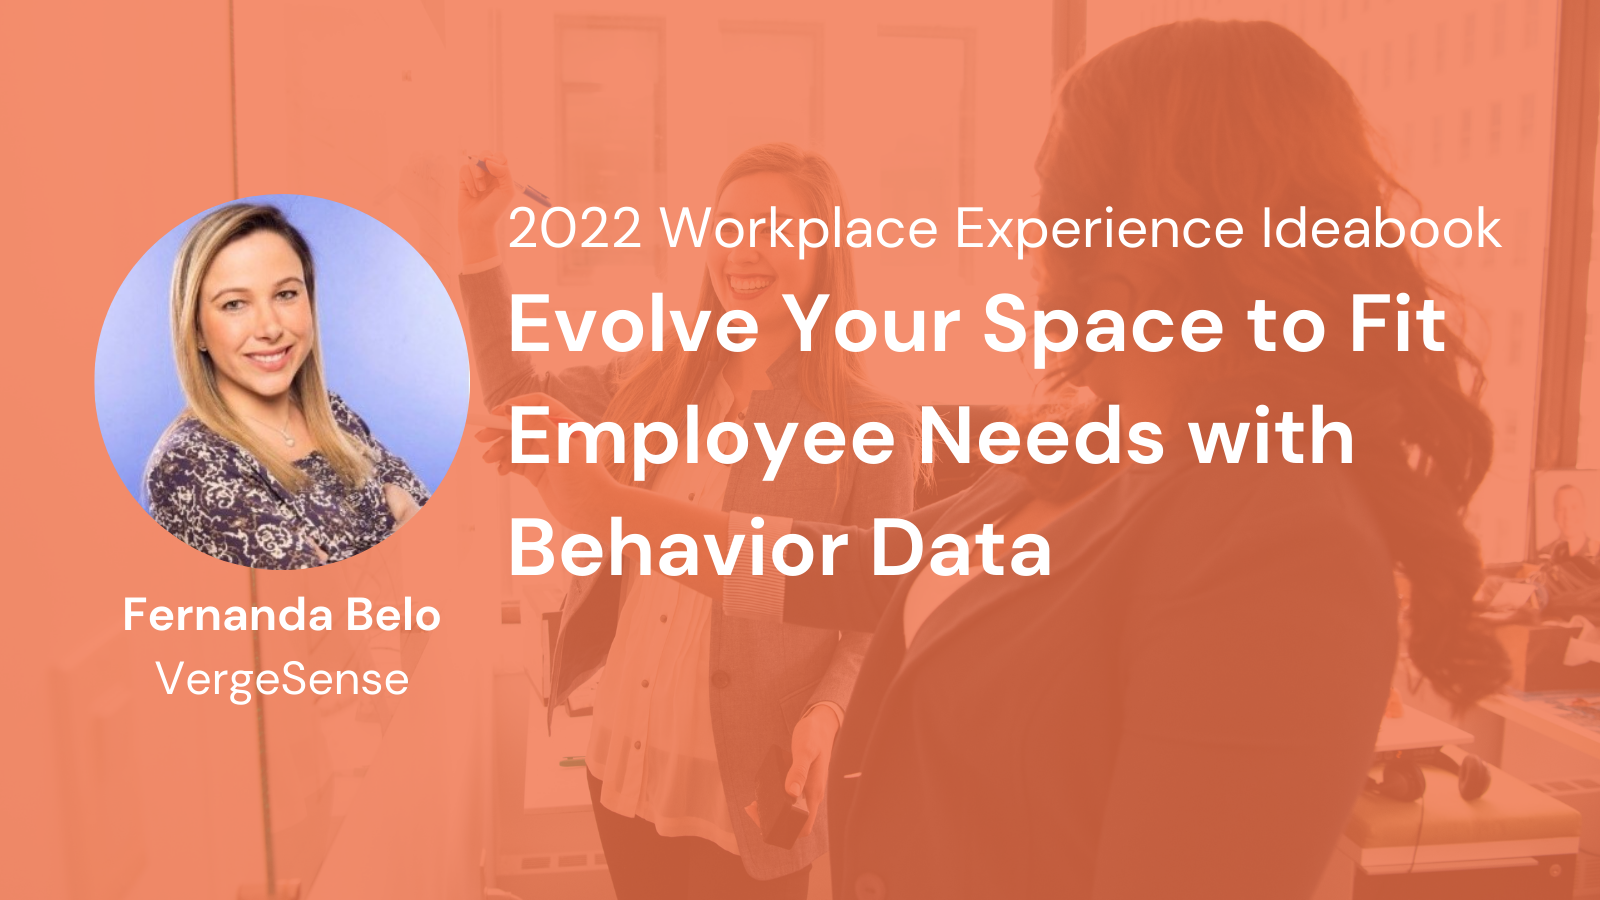 Evolve Your Space to Fit Employee Needs with Behavior Data - 2022 Workplace Experience Ideabook